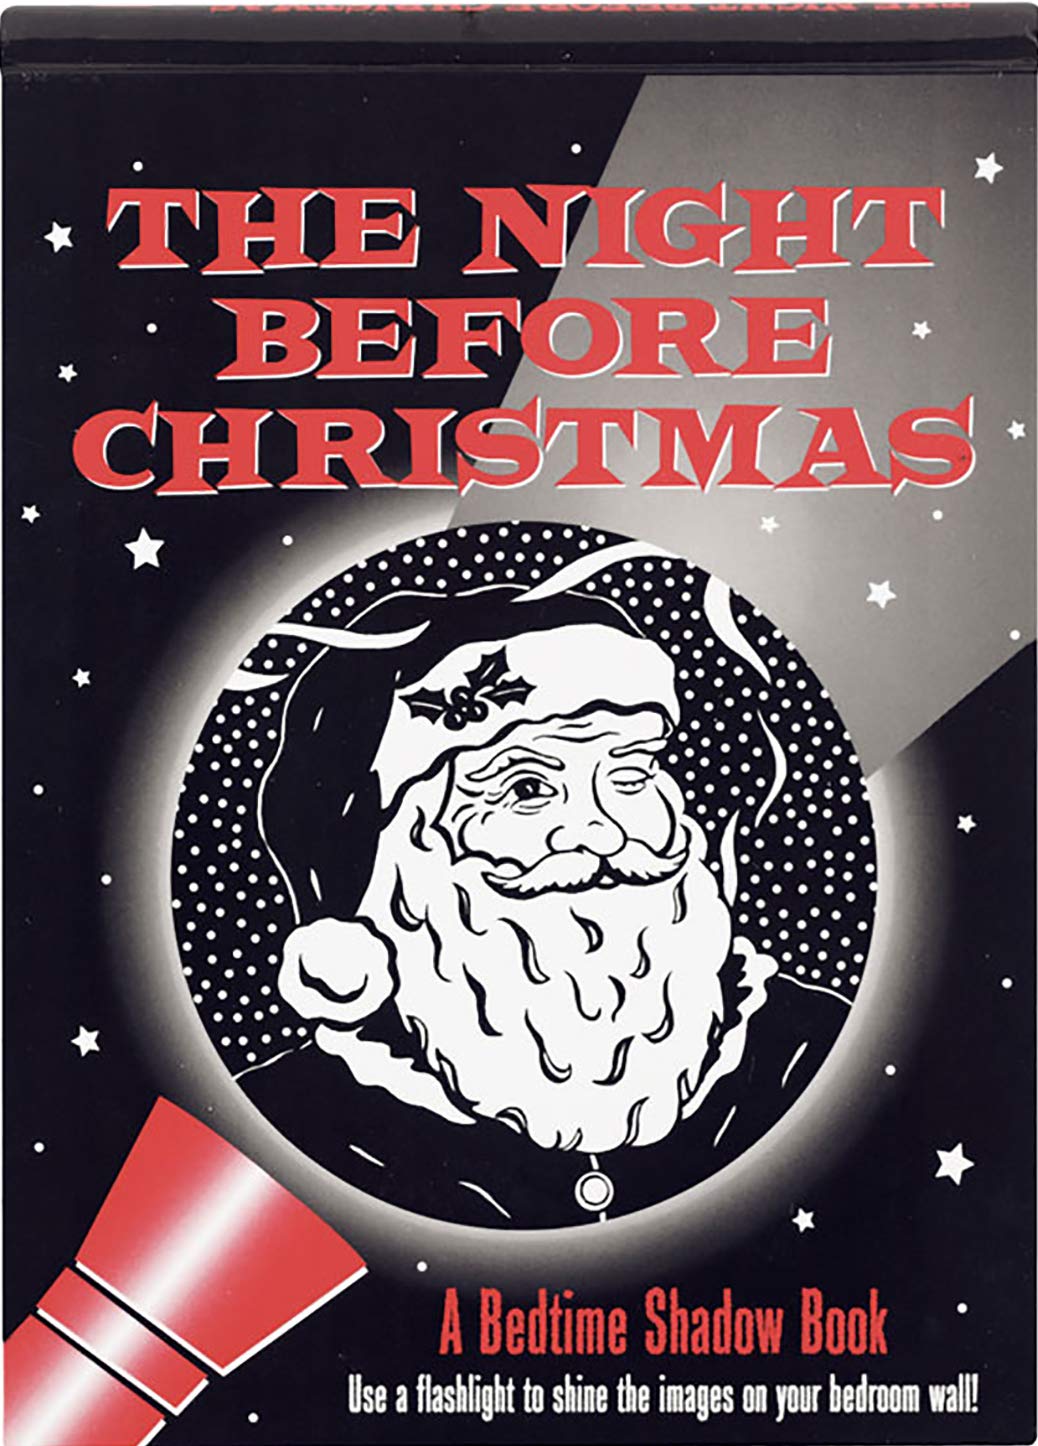 Bedtime Shadow Book: The Night Before Christmas - Ages 3-9